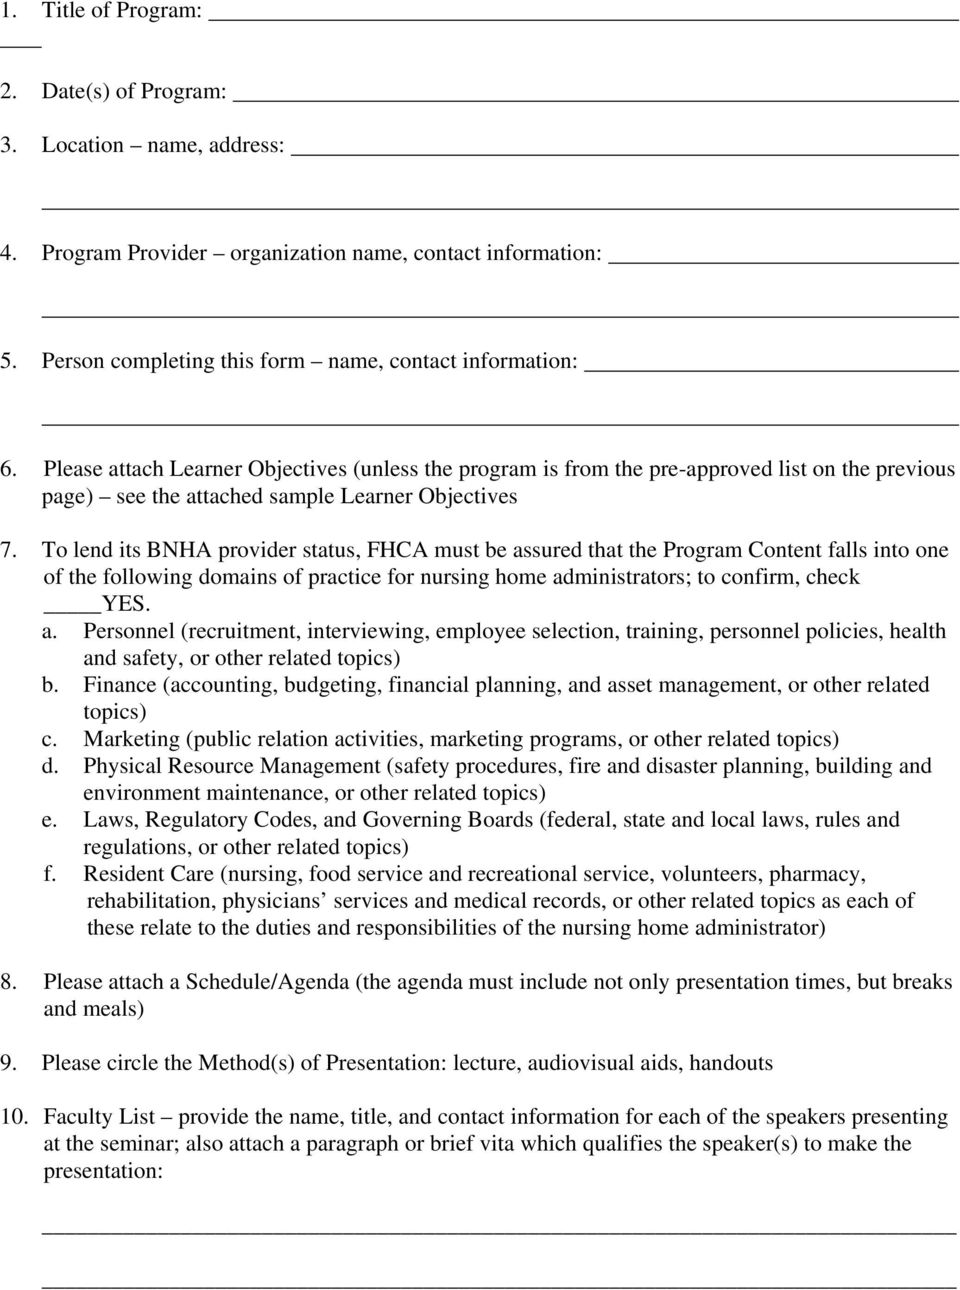 To lend its BNHA provider status, FHCA must be assured that the Program Content falls into one of the following domains of practice for nursing home administrators; to confirm, check YES. a. Personnel (recruitment, interviewing, employee selection, training, personnel policies, health and safety, or other related topics) b.